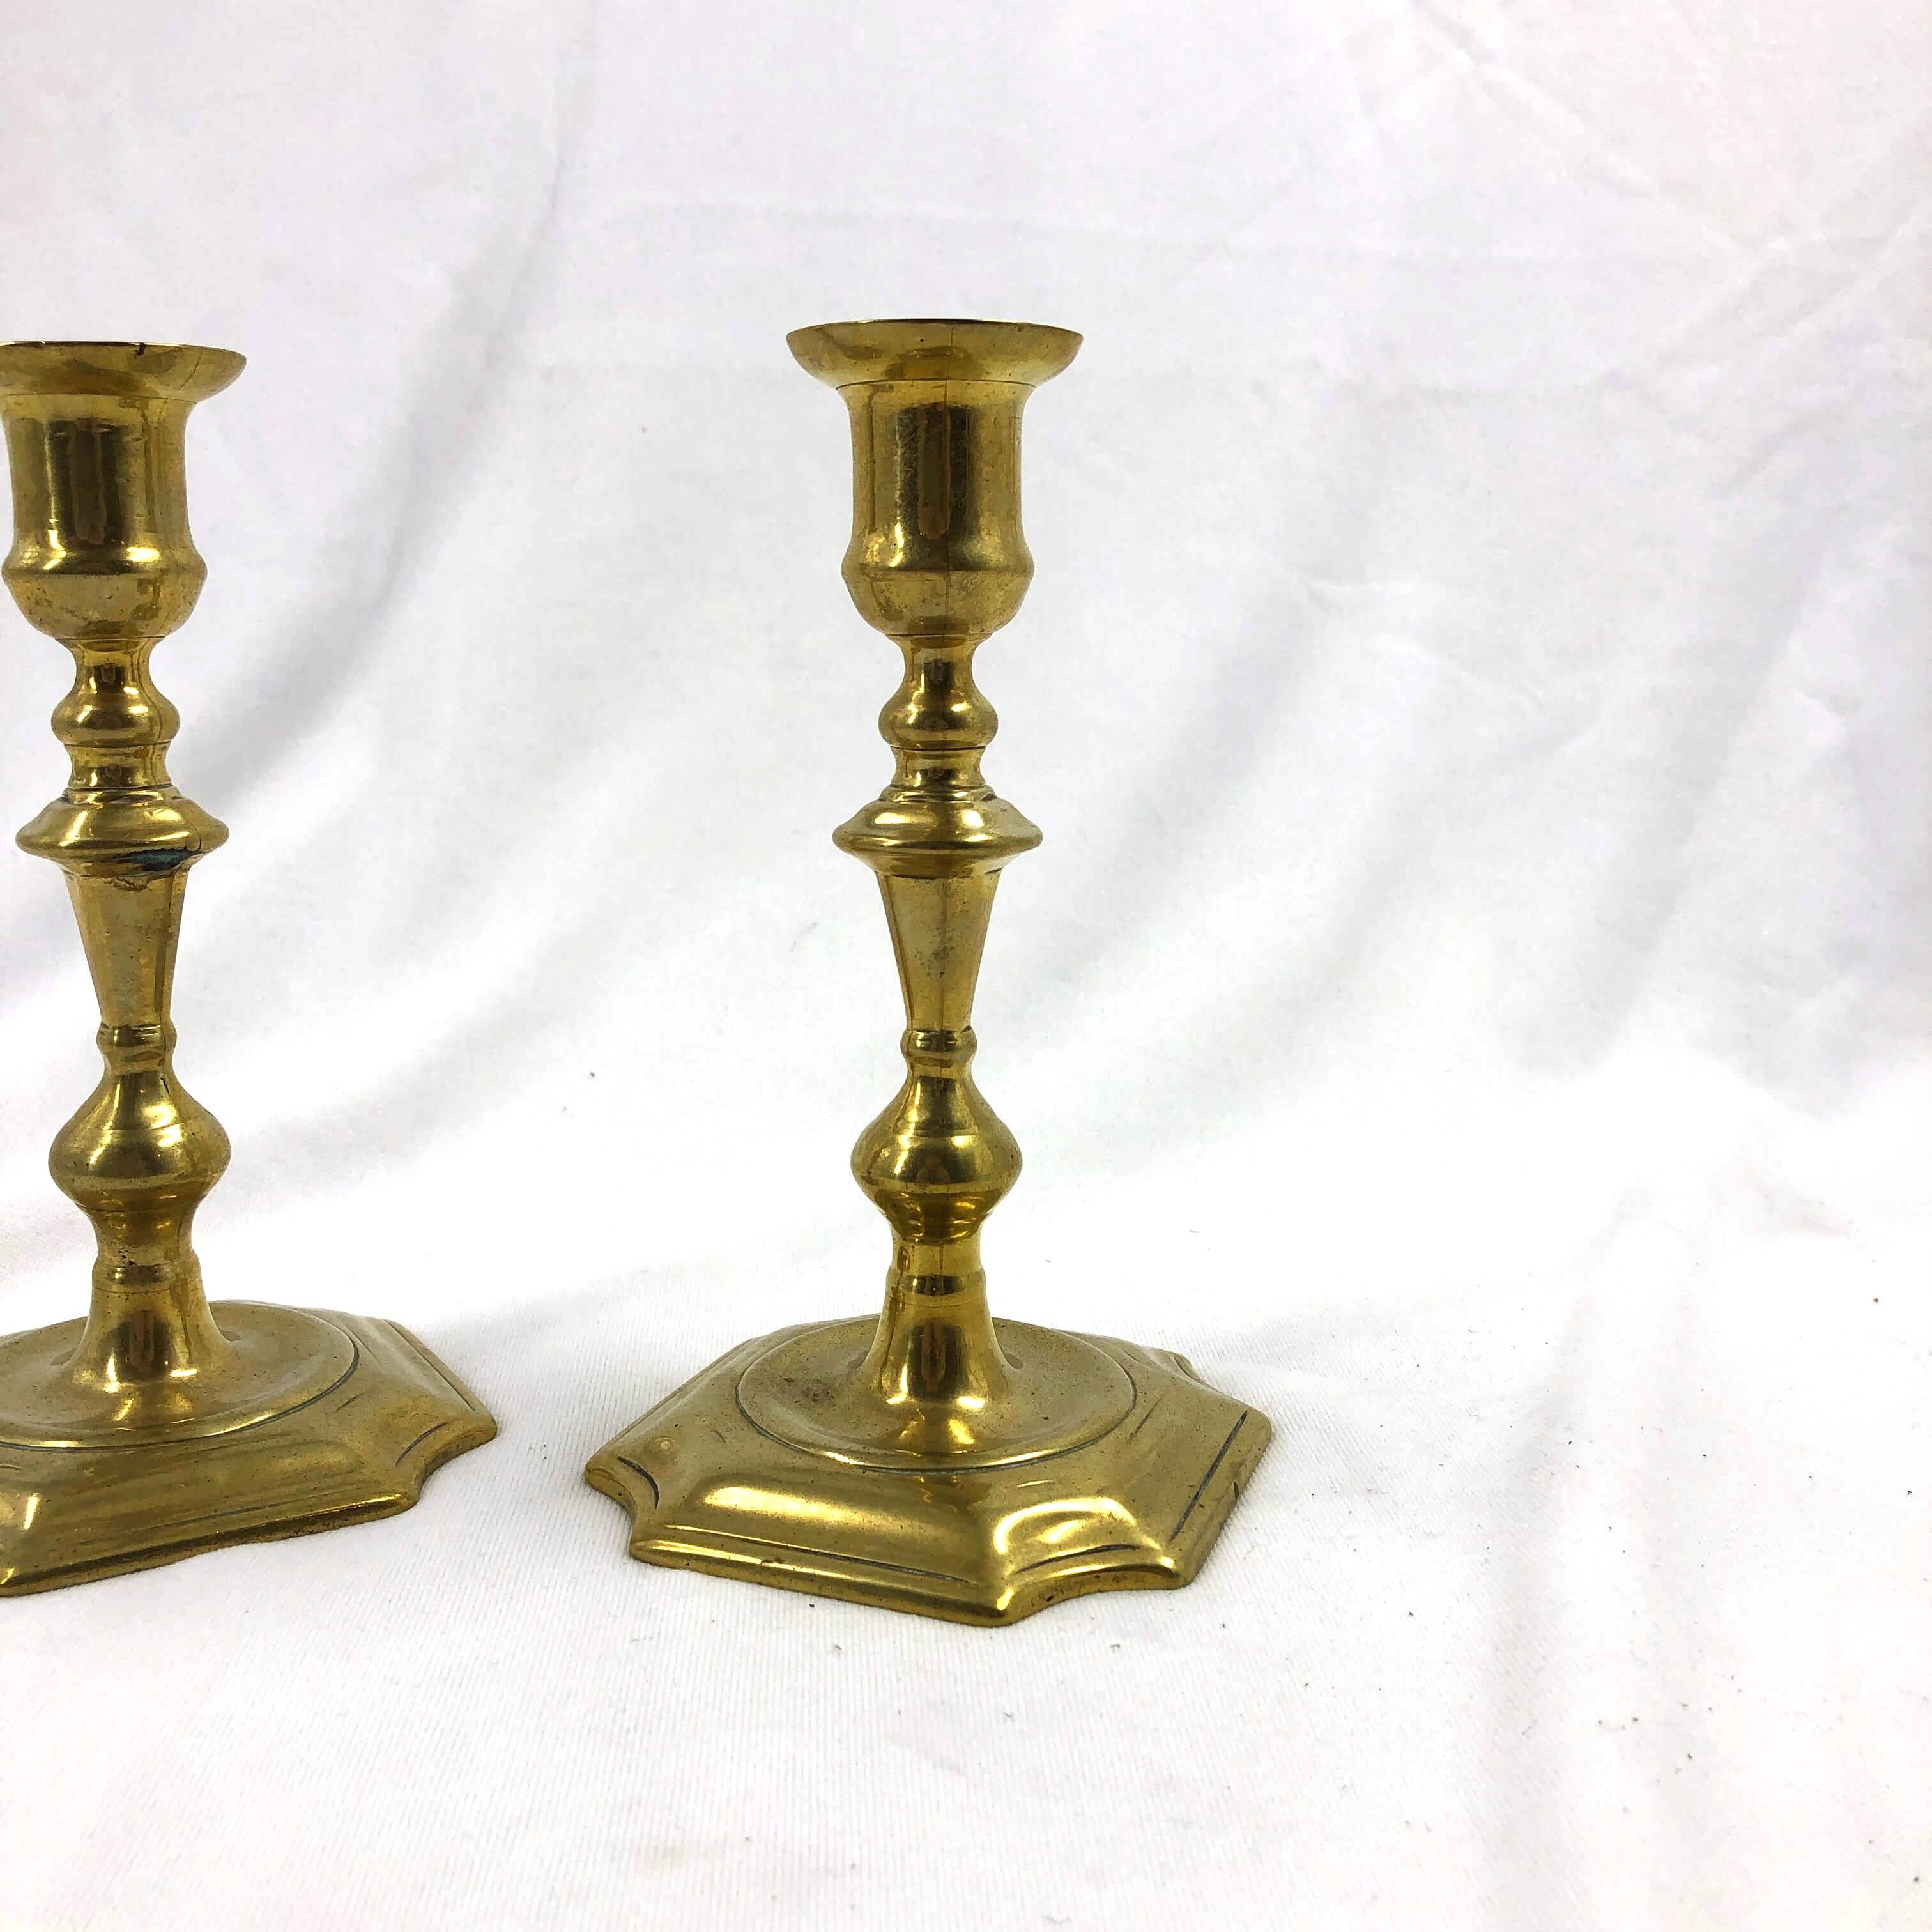 A rare pair of English Queen Anne turned brass candlesticks with incut corners to the bases.